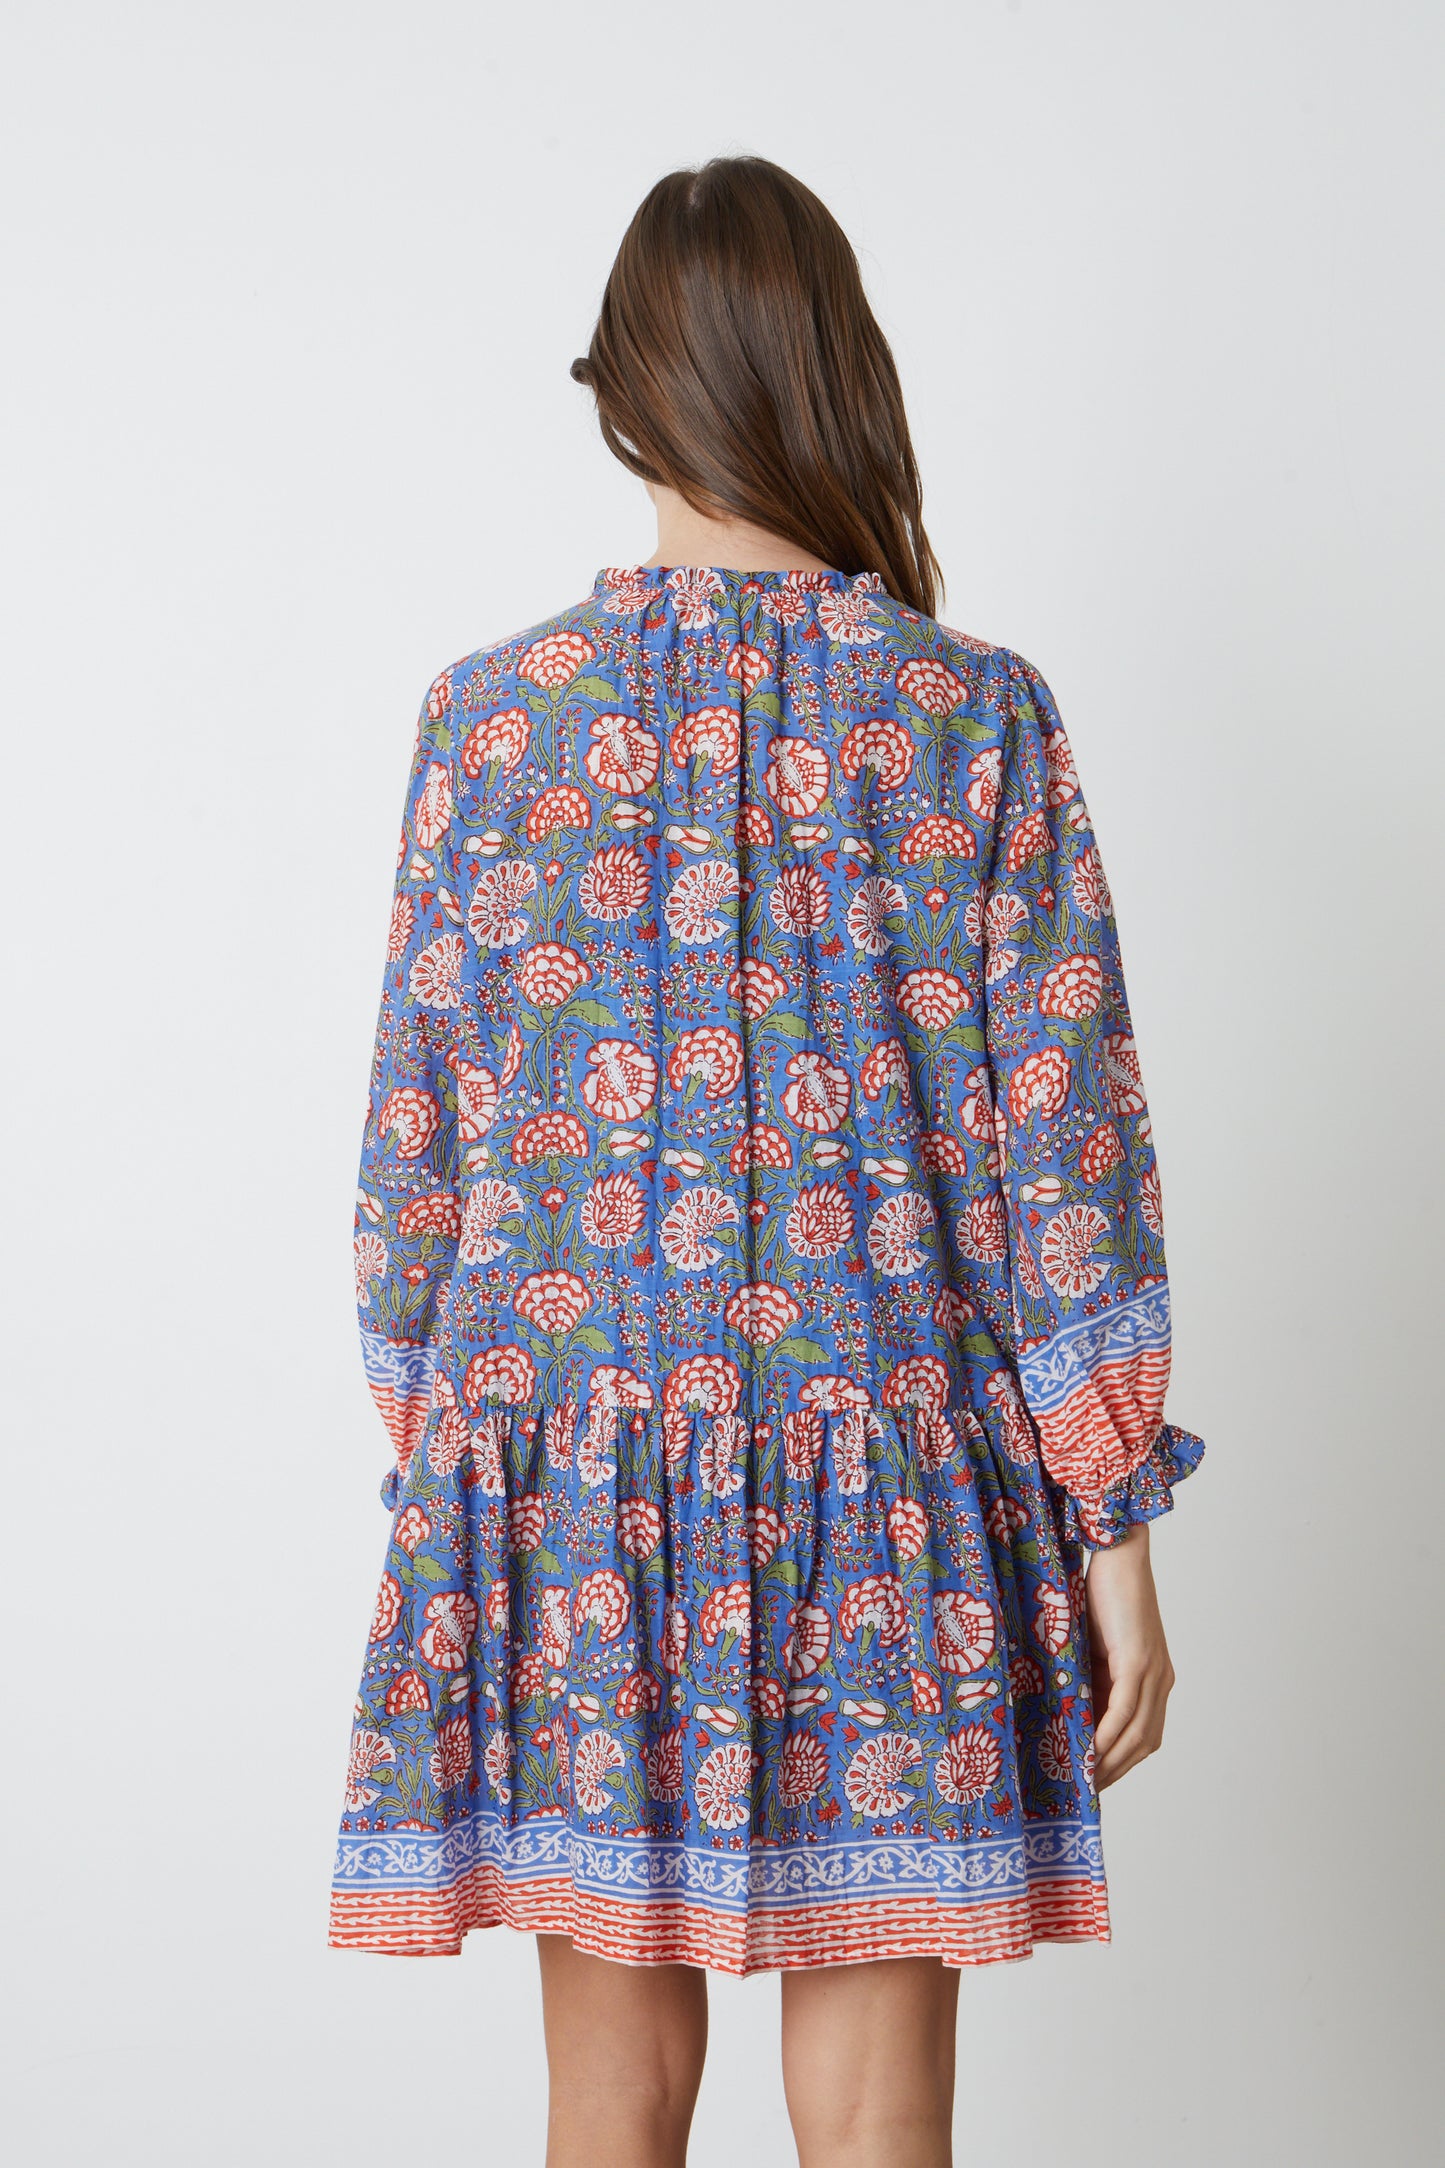 The back view of a woman wearing a Velvet by Graham & Spencer JULIETTE PRINTED BOHO DRESS.-26577349968065